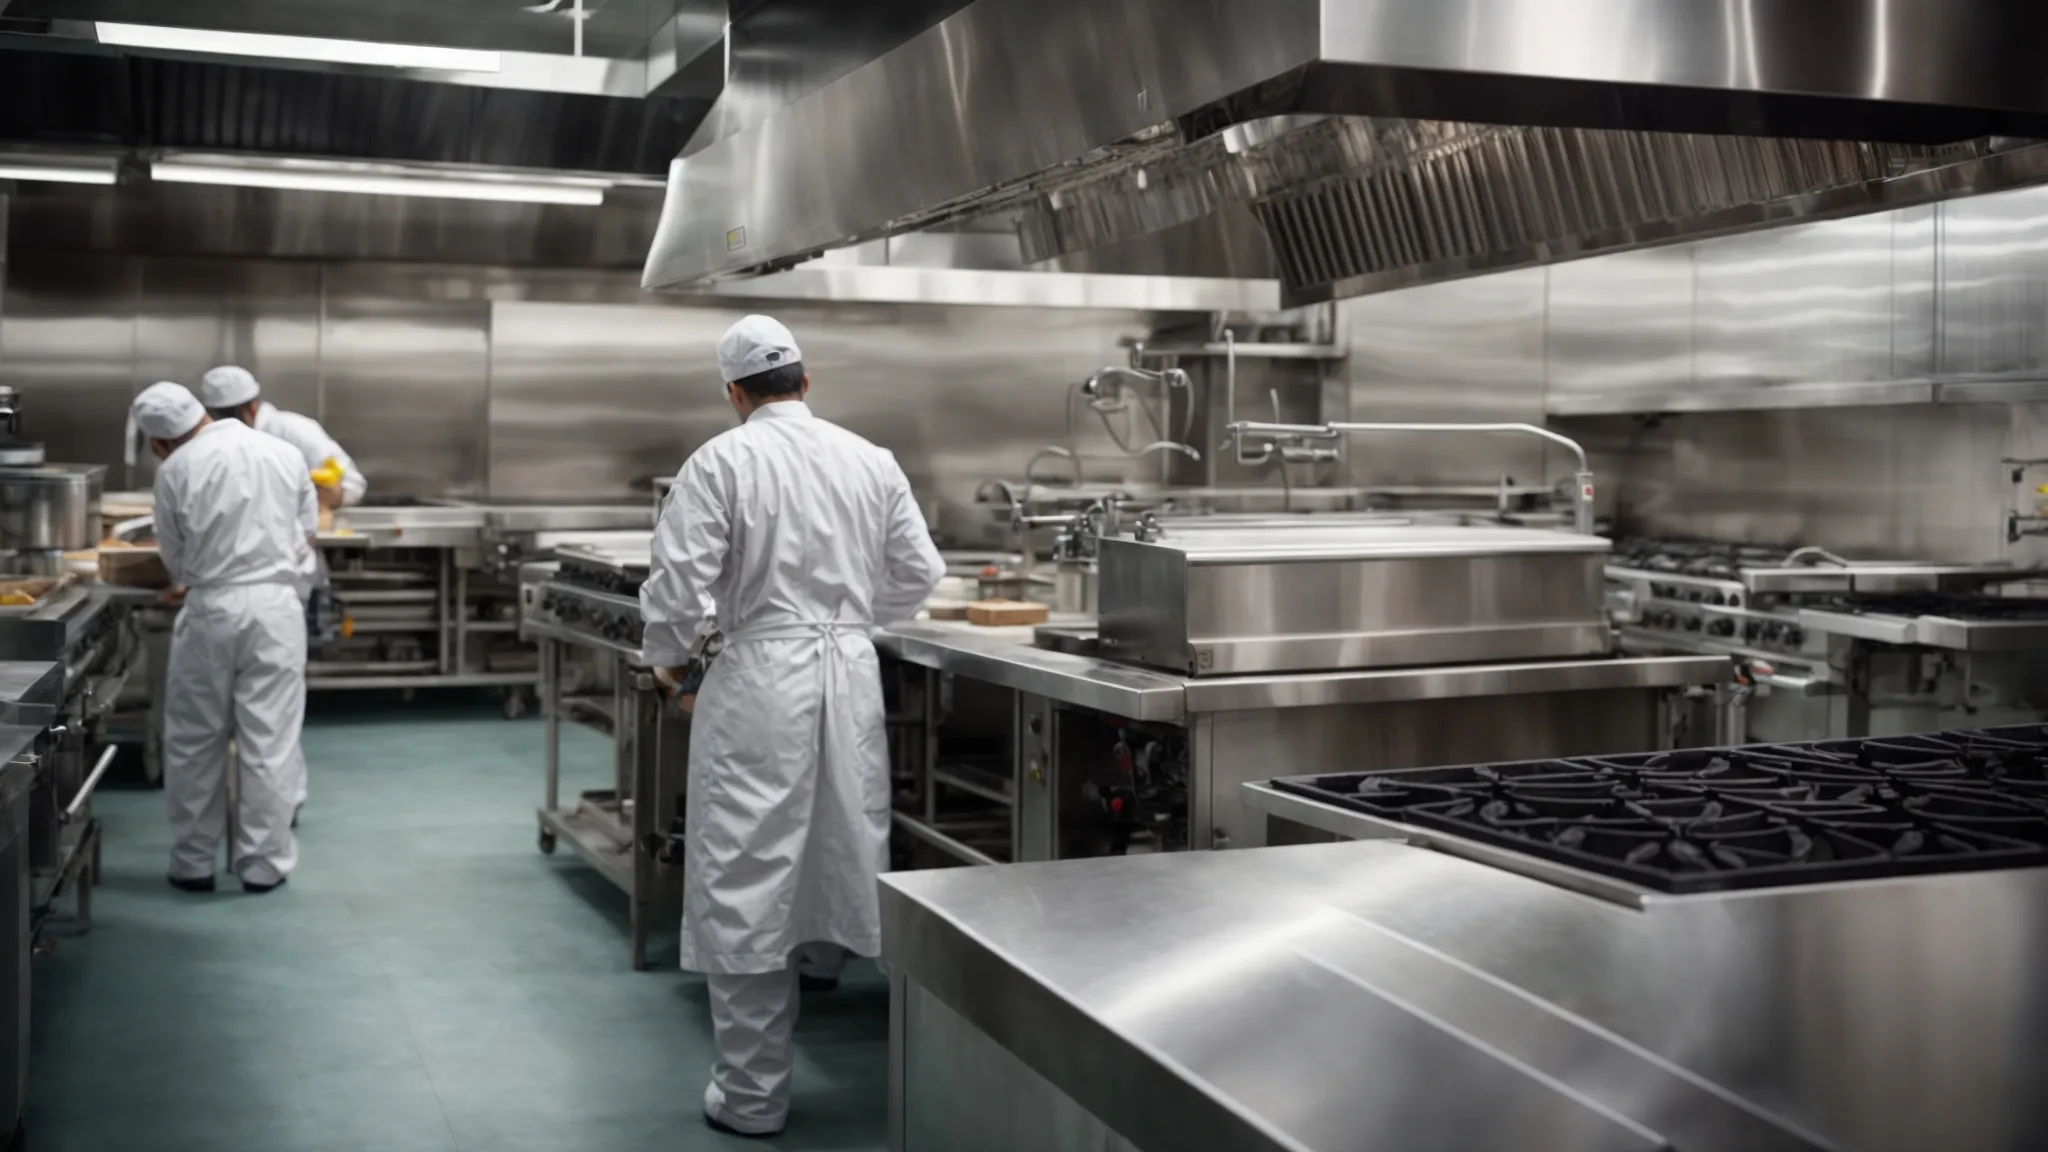 a professional team cleans a large commercial kitchen, focusing on the hood and exhaust systems to ensure safety and efficiency.